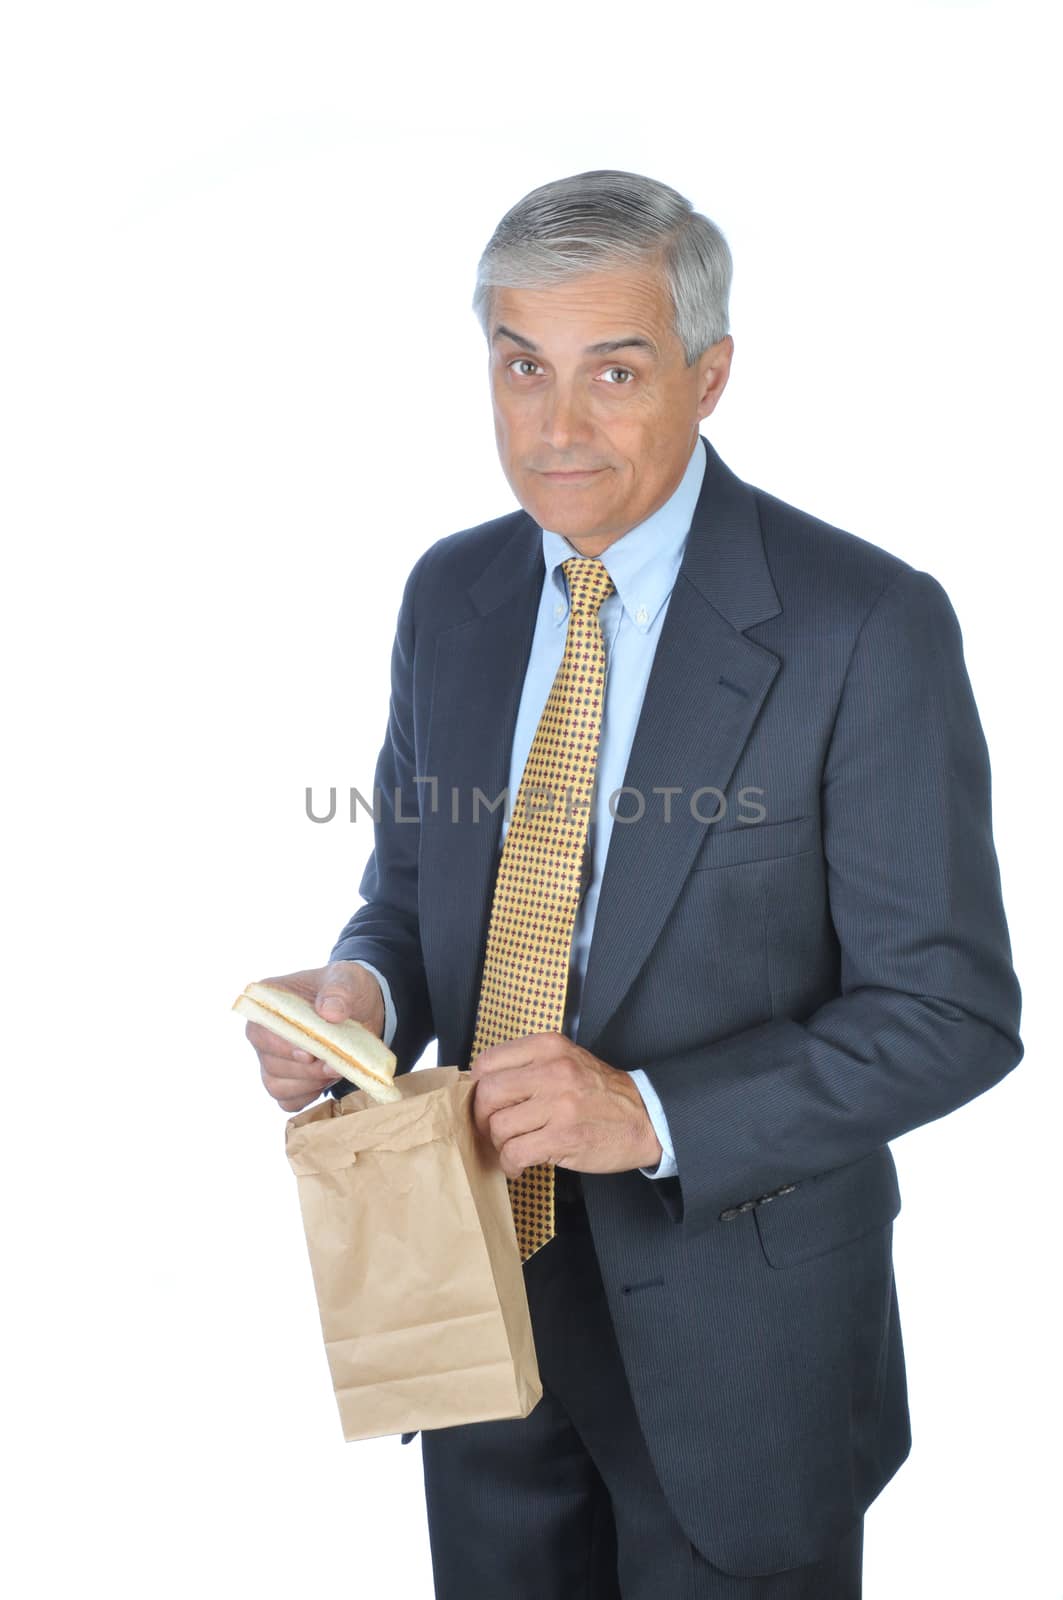 Businessman holding brown bag and sandwich isolated on white